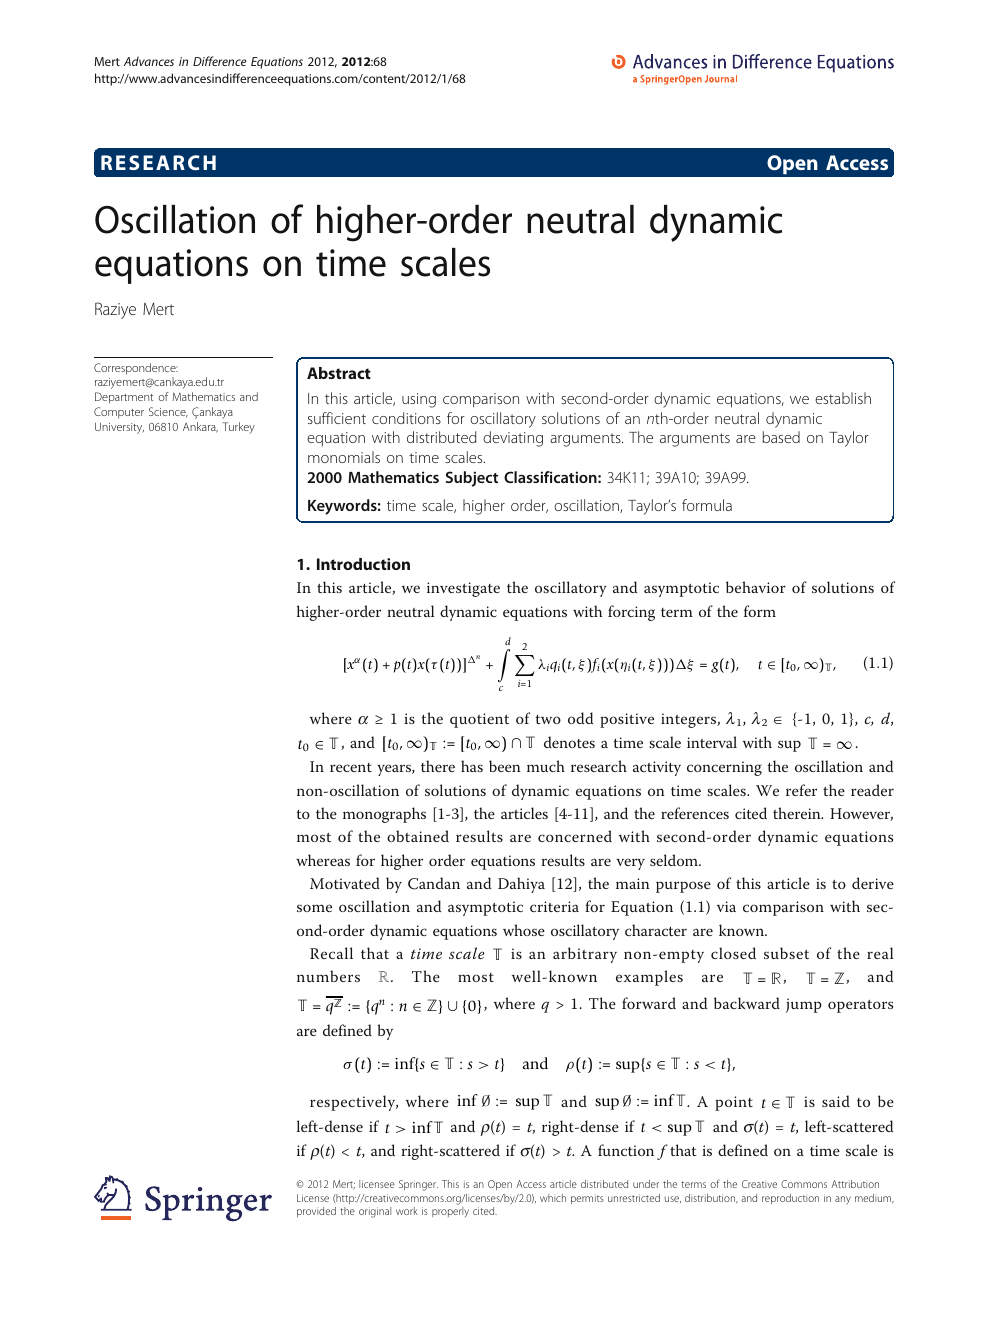 Oscillation Of Higher Order Neutral Dynamic Equations On Time Scales Topic Of Research Paper In Mathematics Download Scholarly Article Pdf And Read For Free On Cyberleninka Open Science Hub